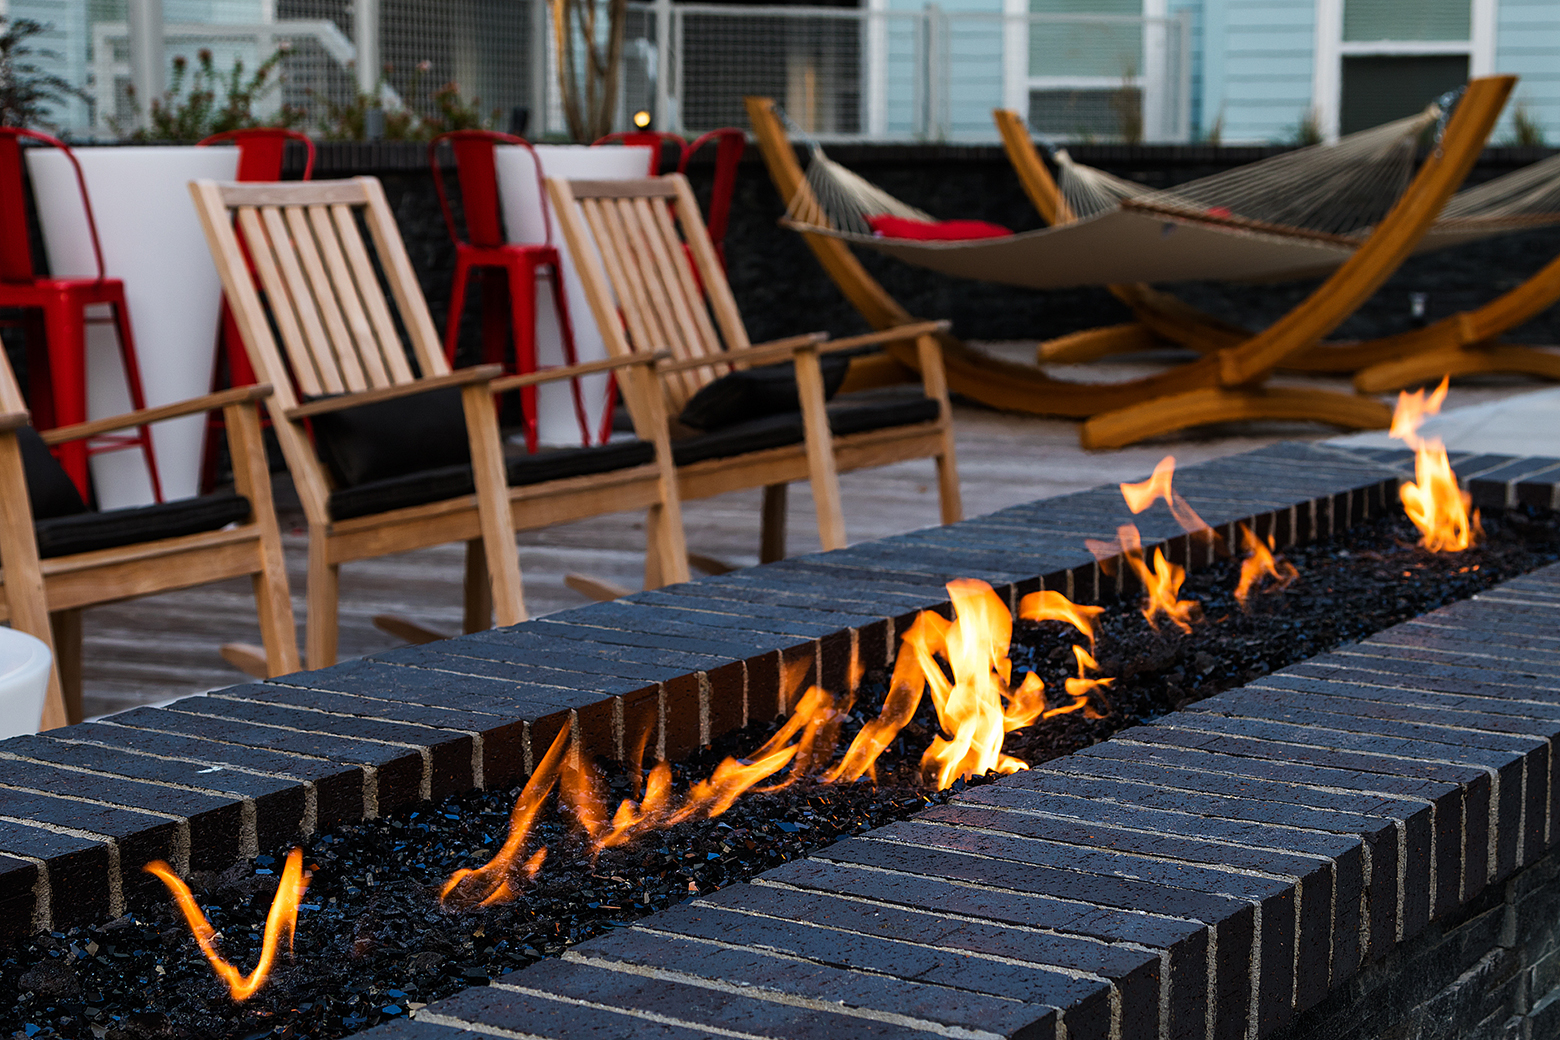 Outdoor living room with fire pit and hammocks